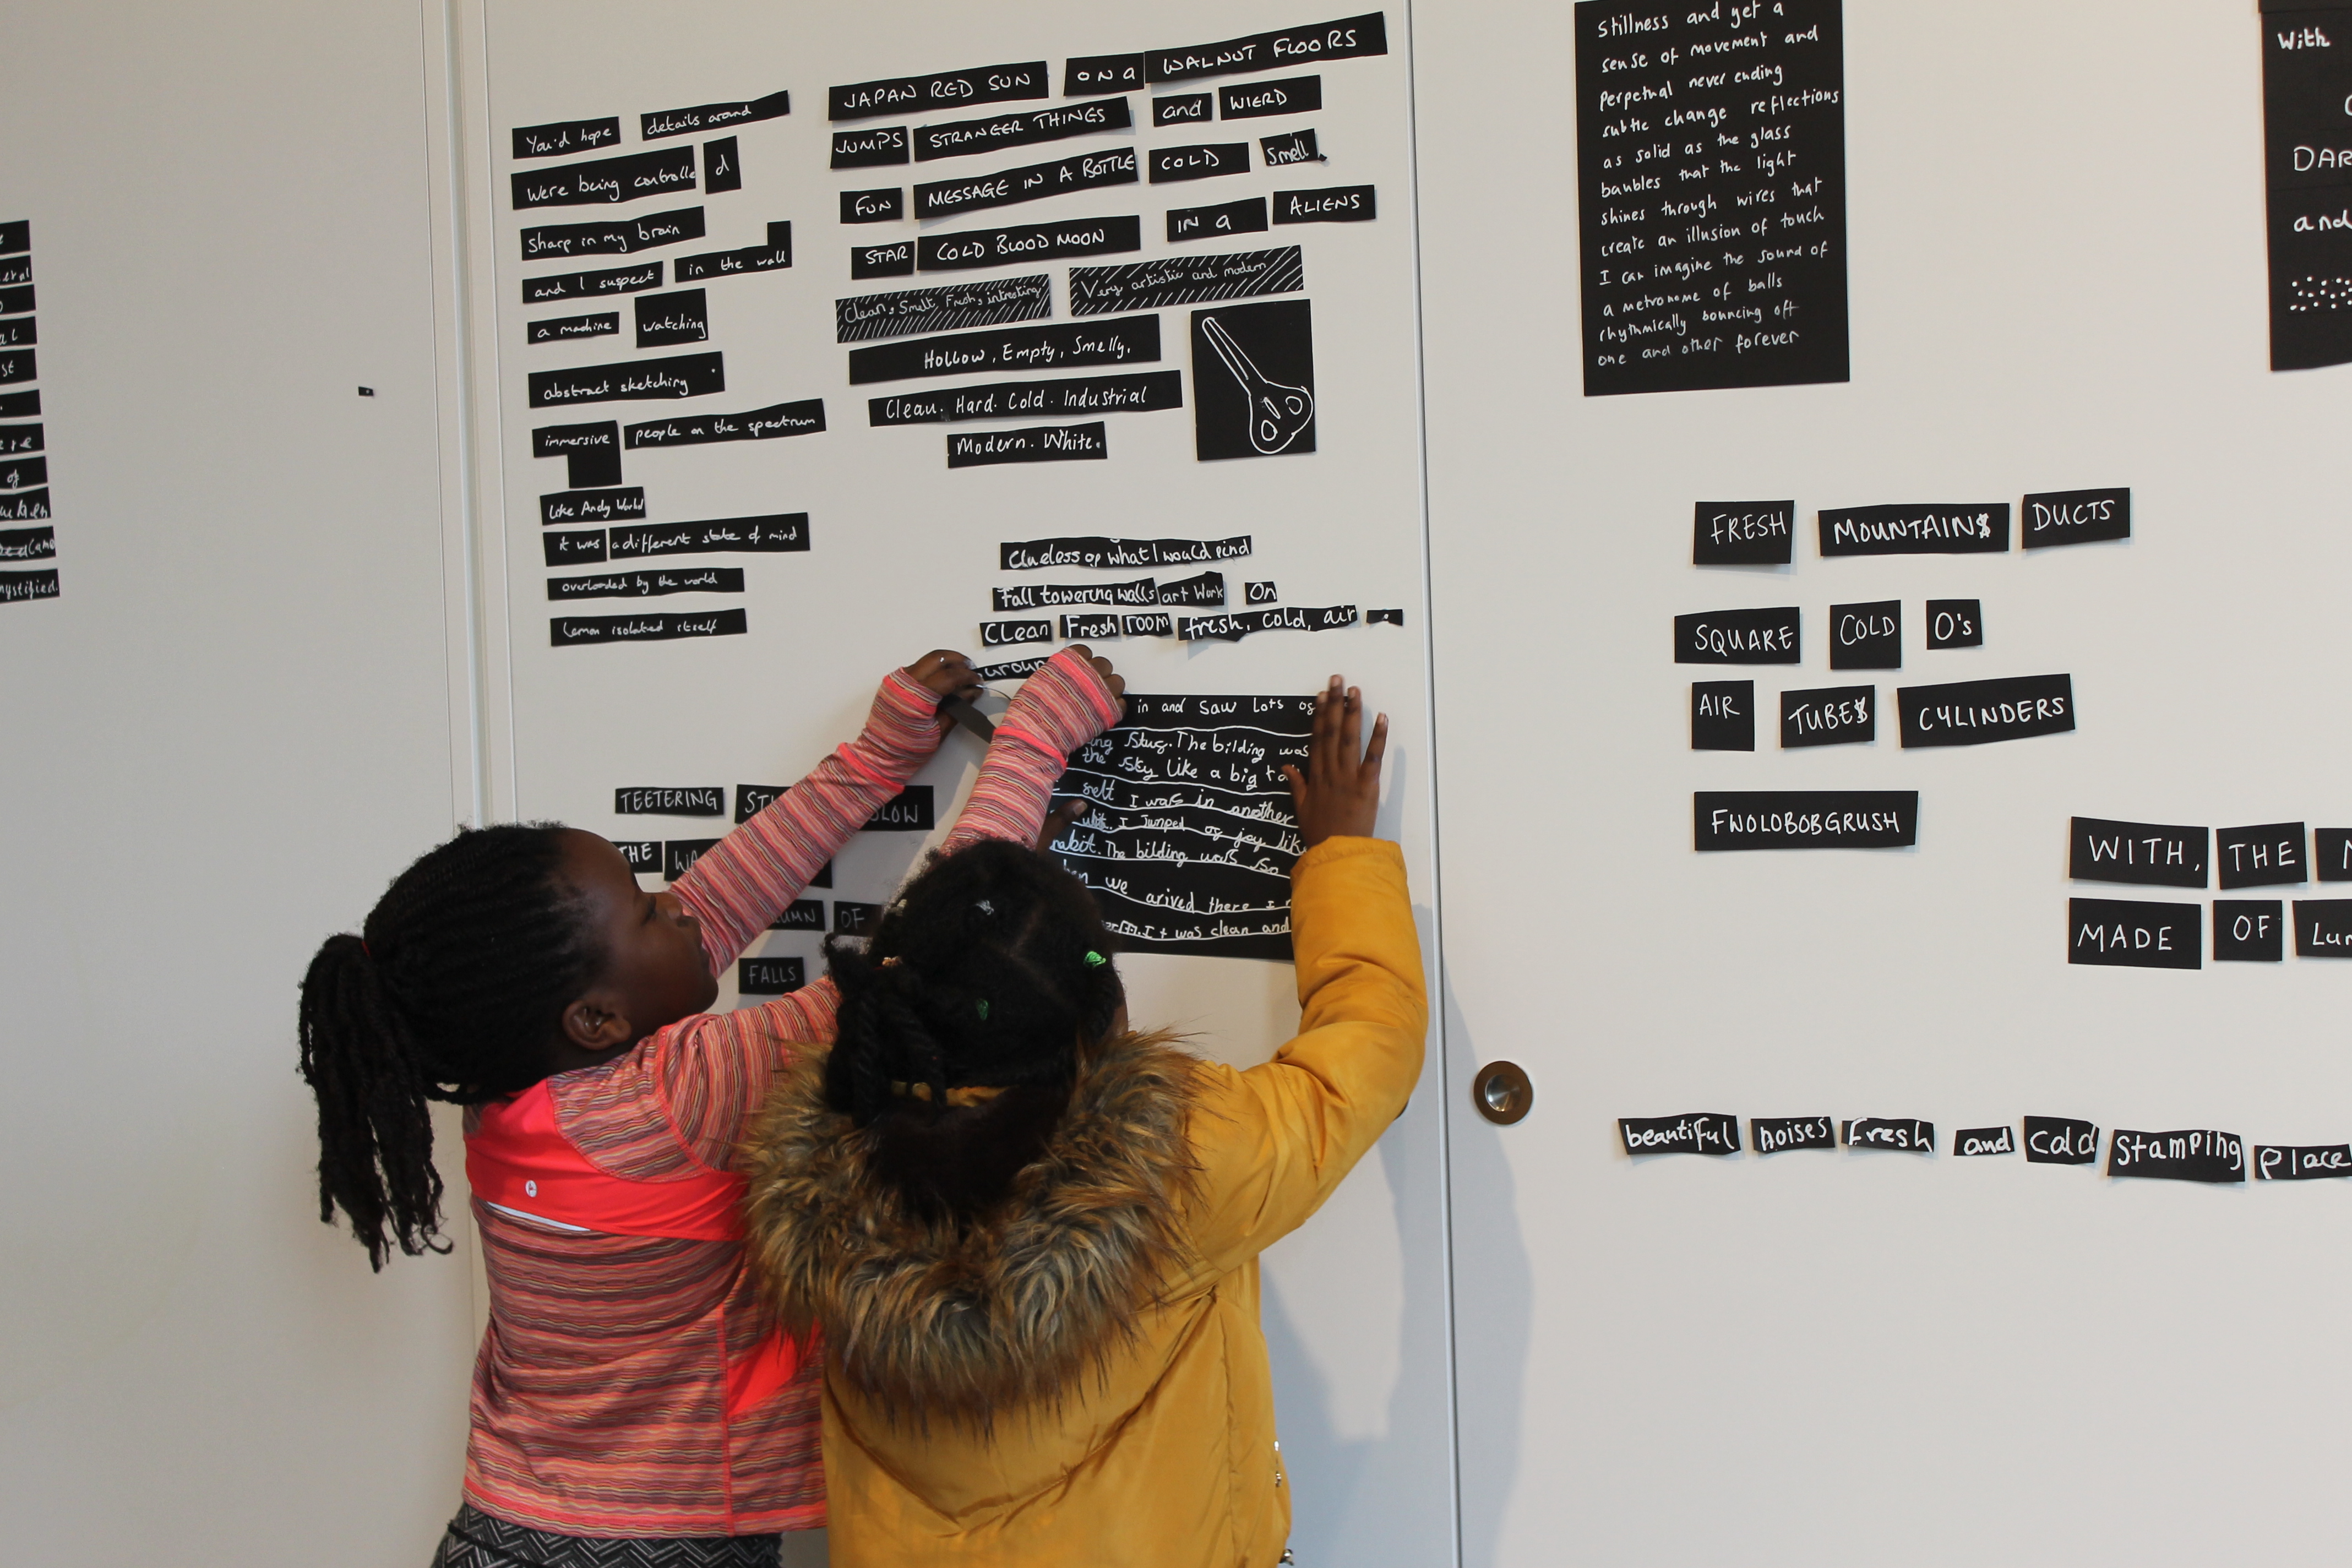 Two young children have their backs to the camera sticking up pieces of black paper with white writing on them to a wall. On the wall we can see lots of other pieces of paper already stuck up.